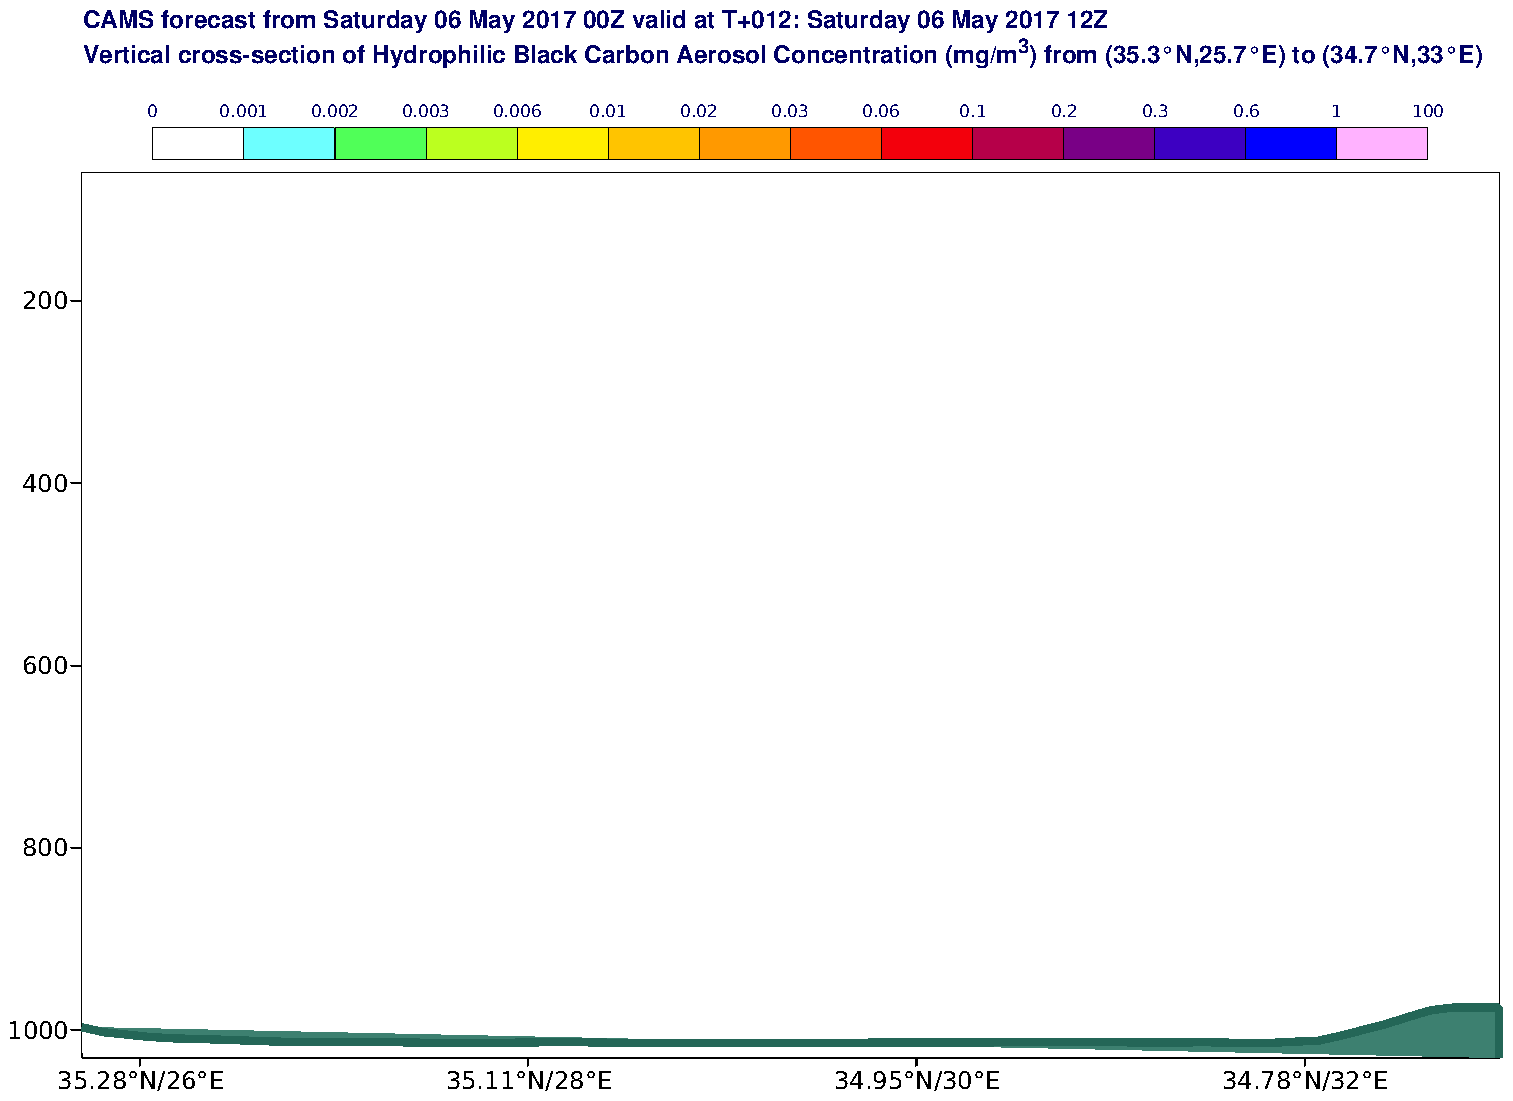 Vertical cross-section of Hydrophilic Black Carbon Aerosol Concentration (mg/m3) valid at T12 - 2017-05-06 12:00